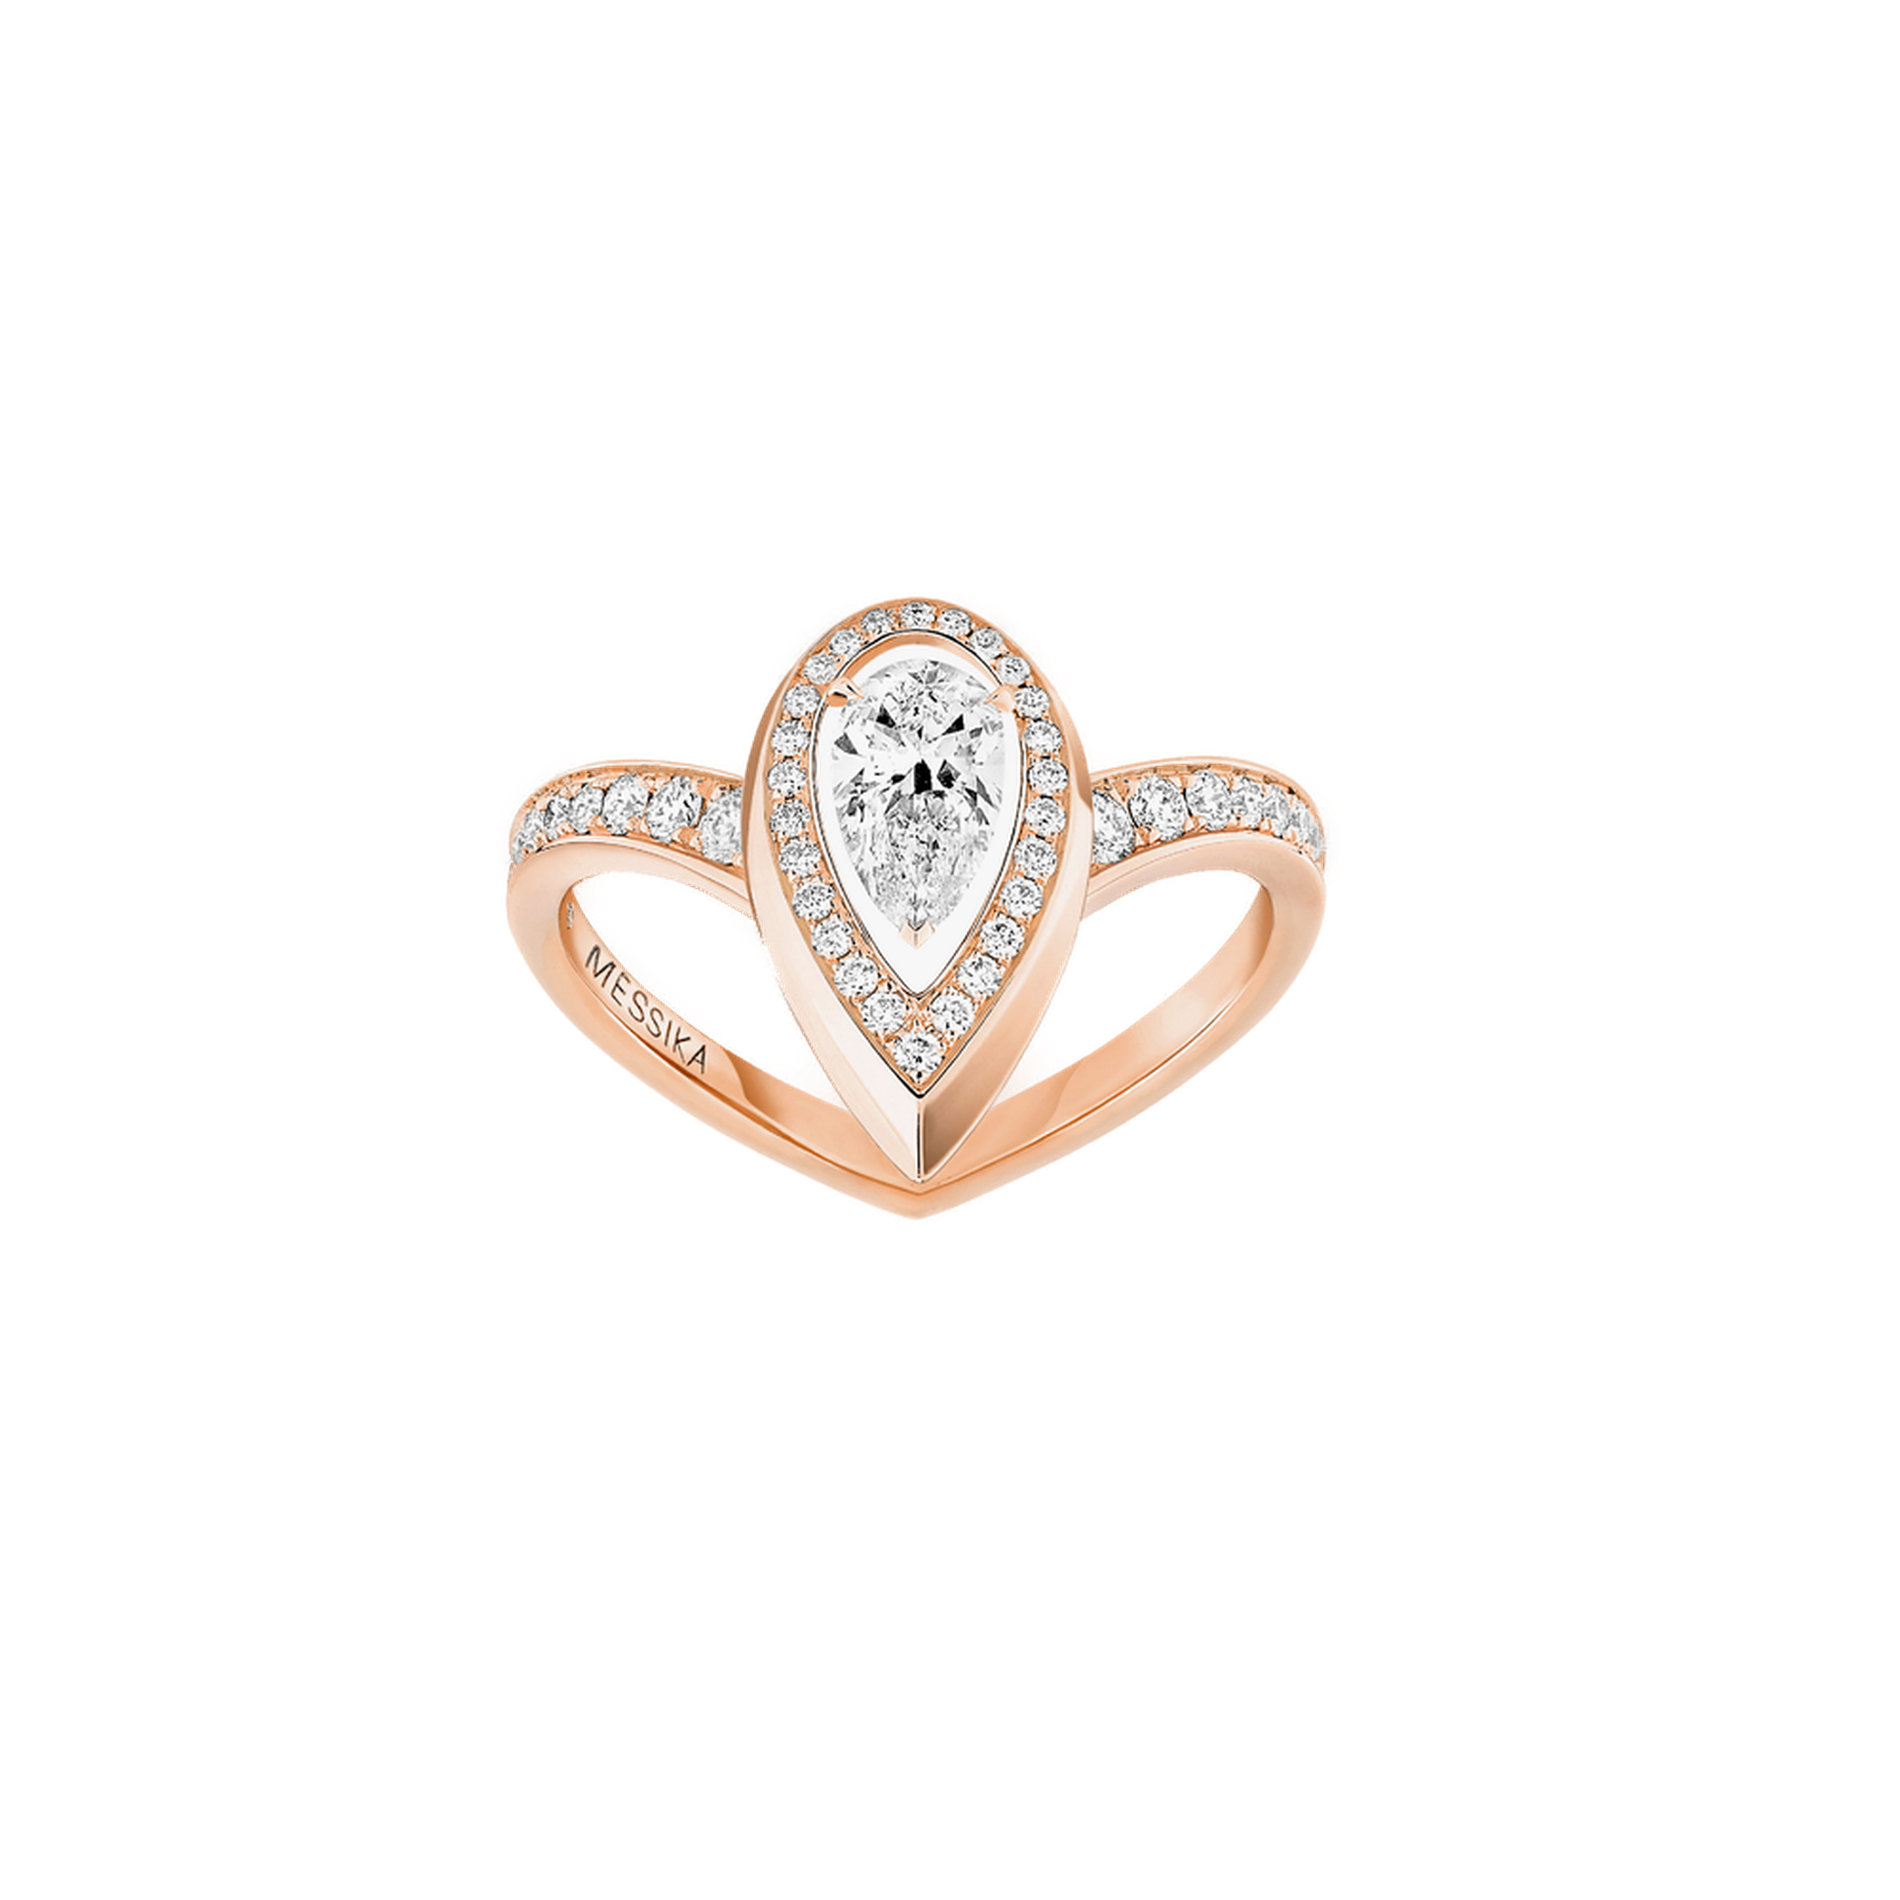 Bague diamant or rose fiery 0,30ct Fiery Référence :  12331-PG -1